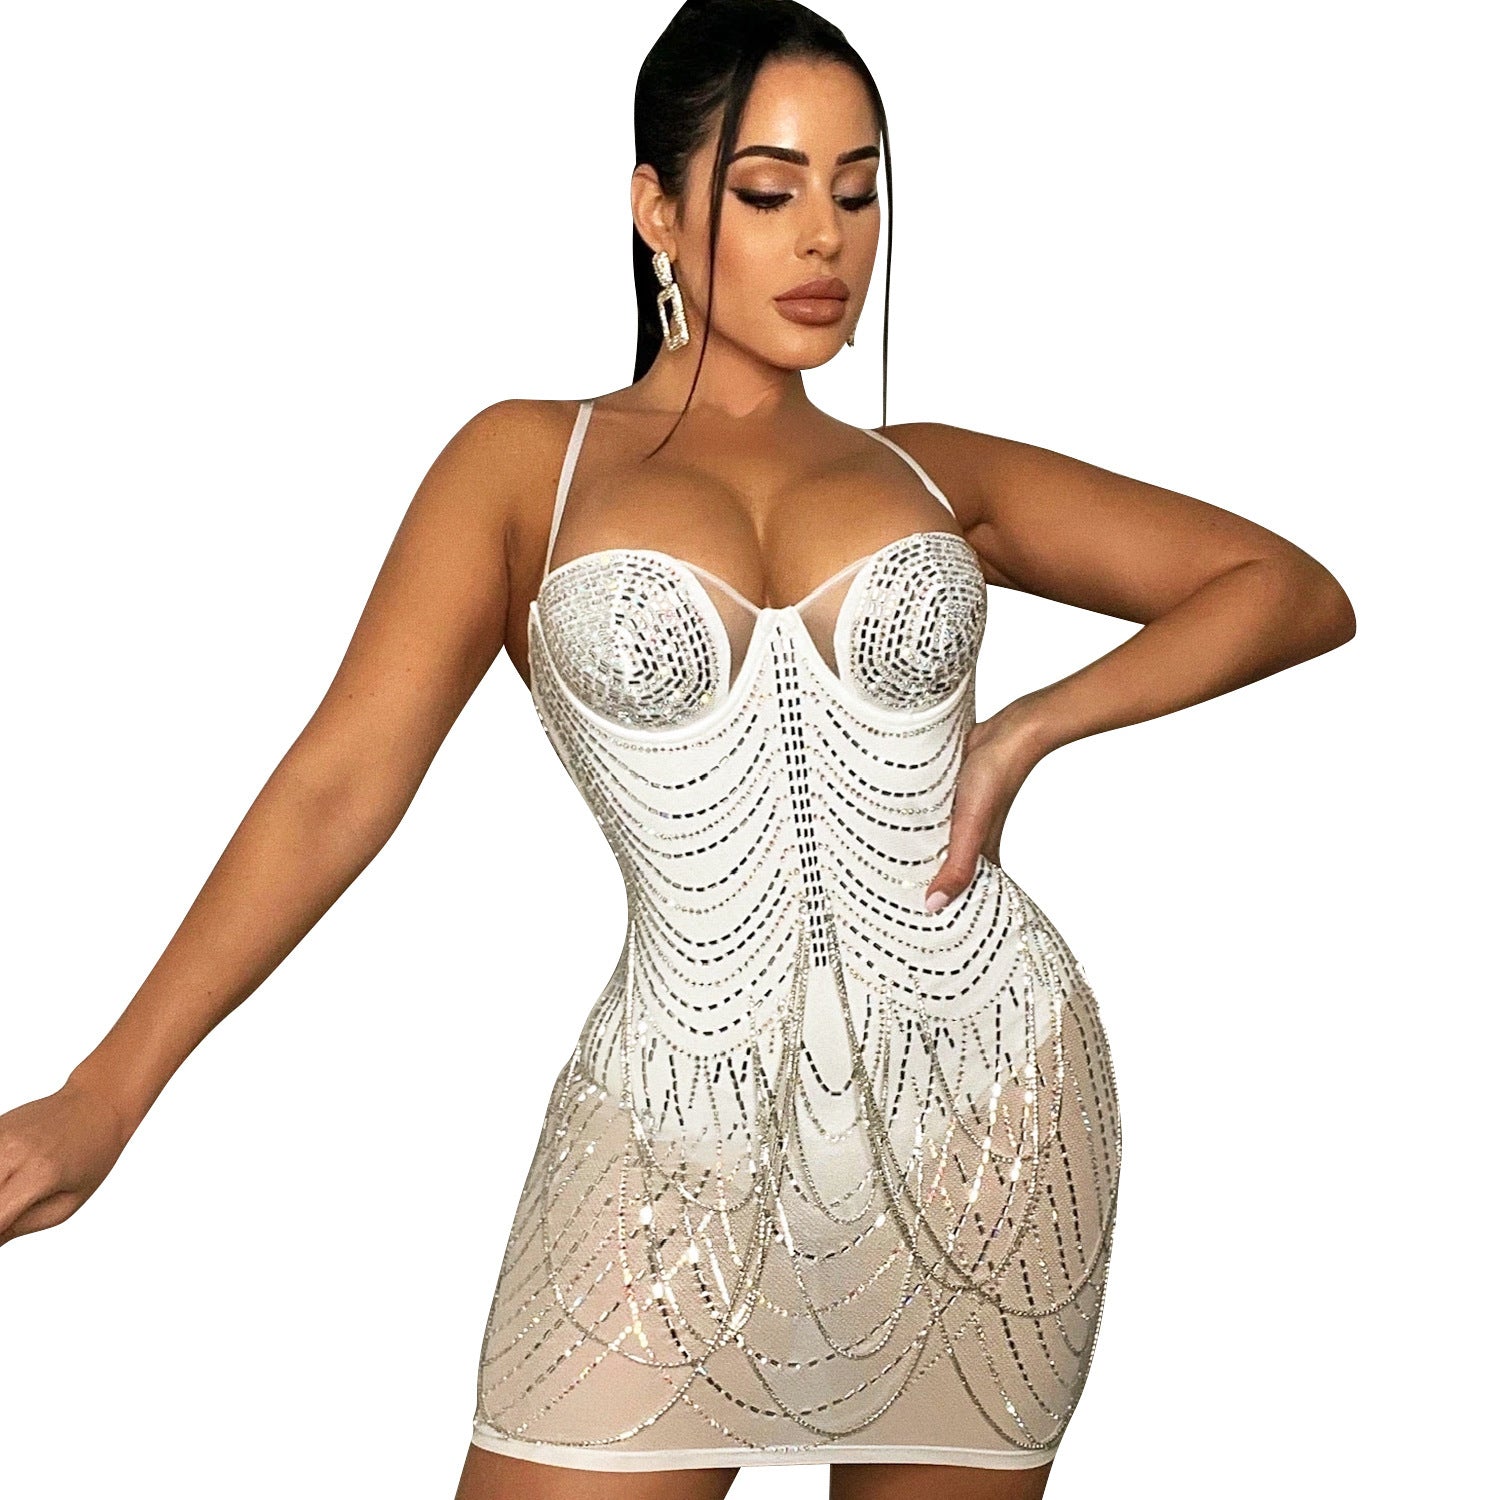 a woman wearing a white bodysuit with sequins